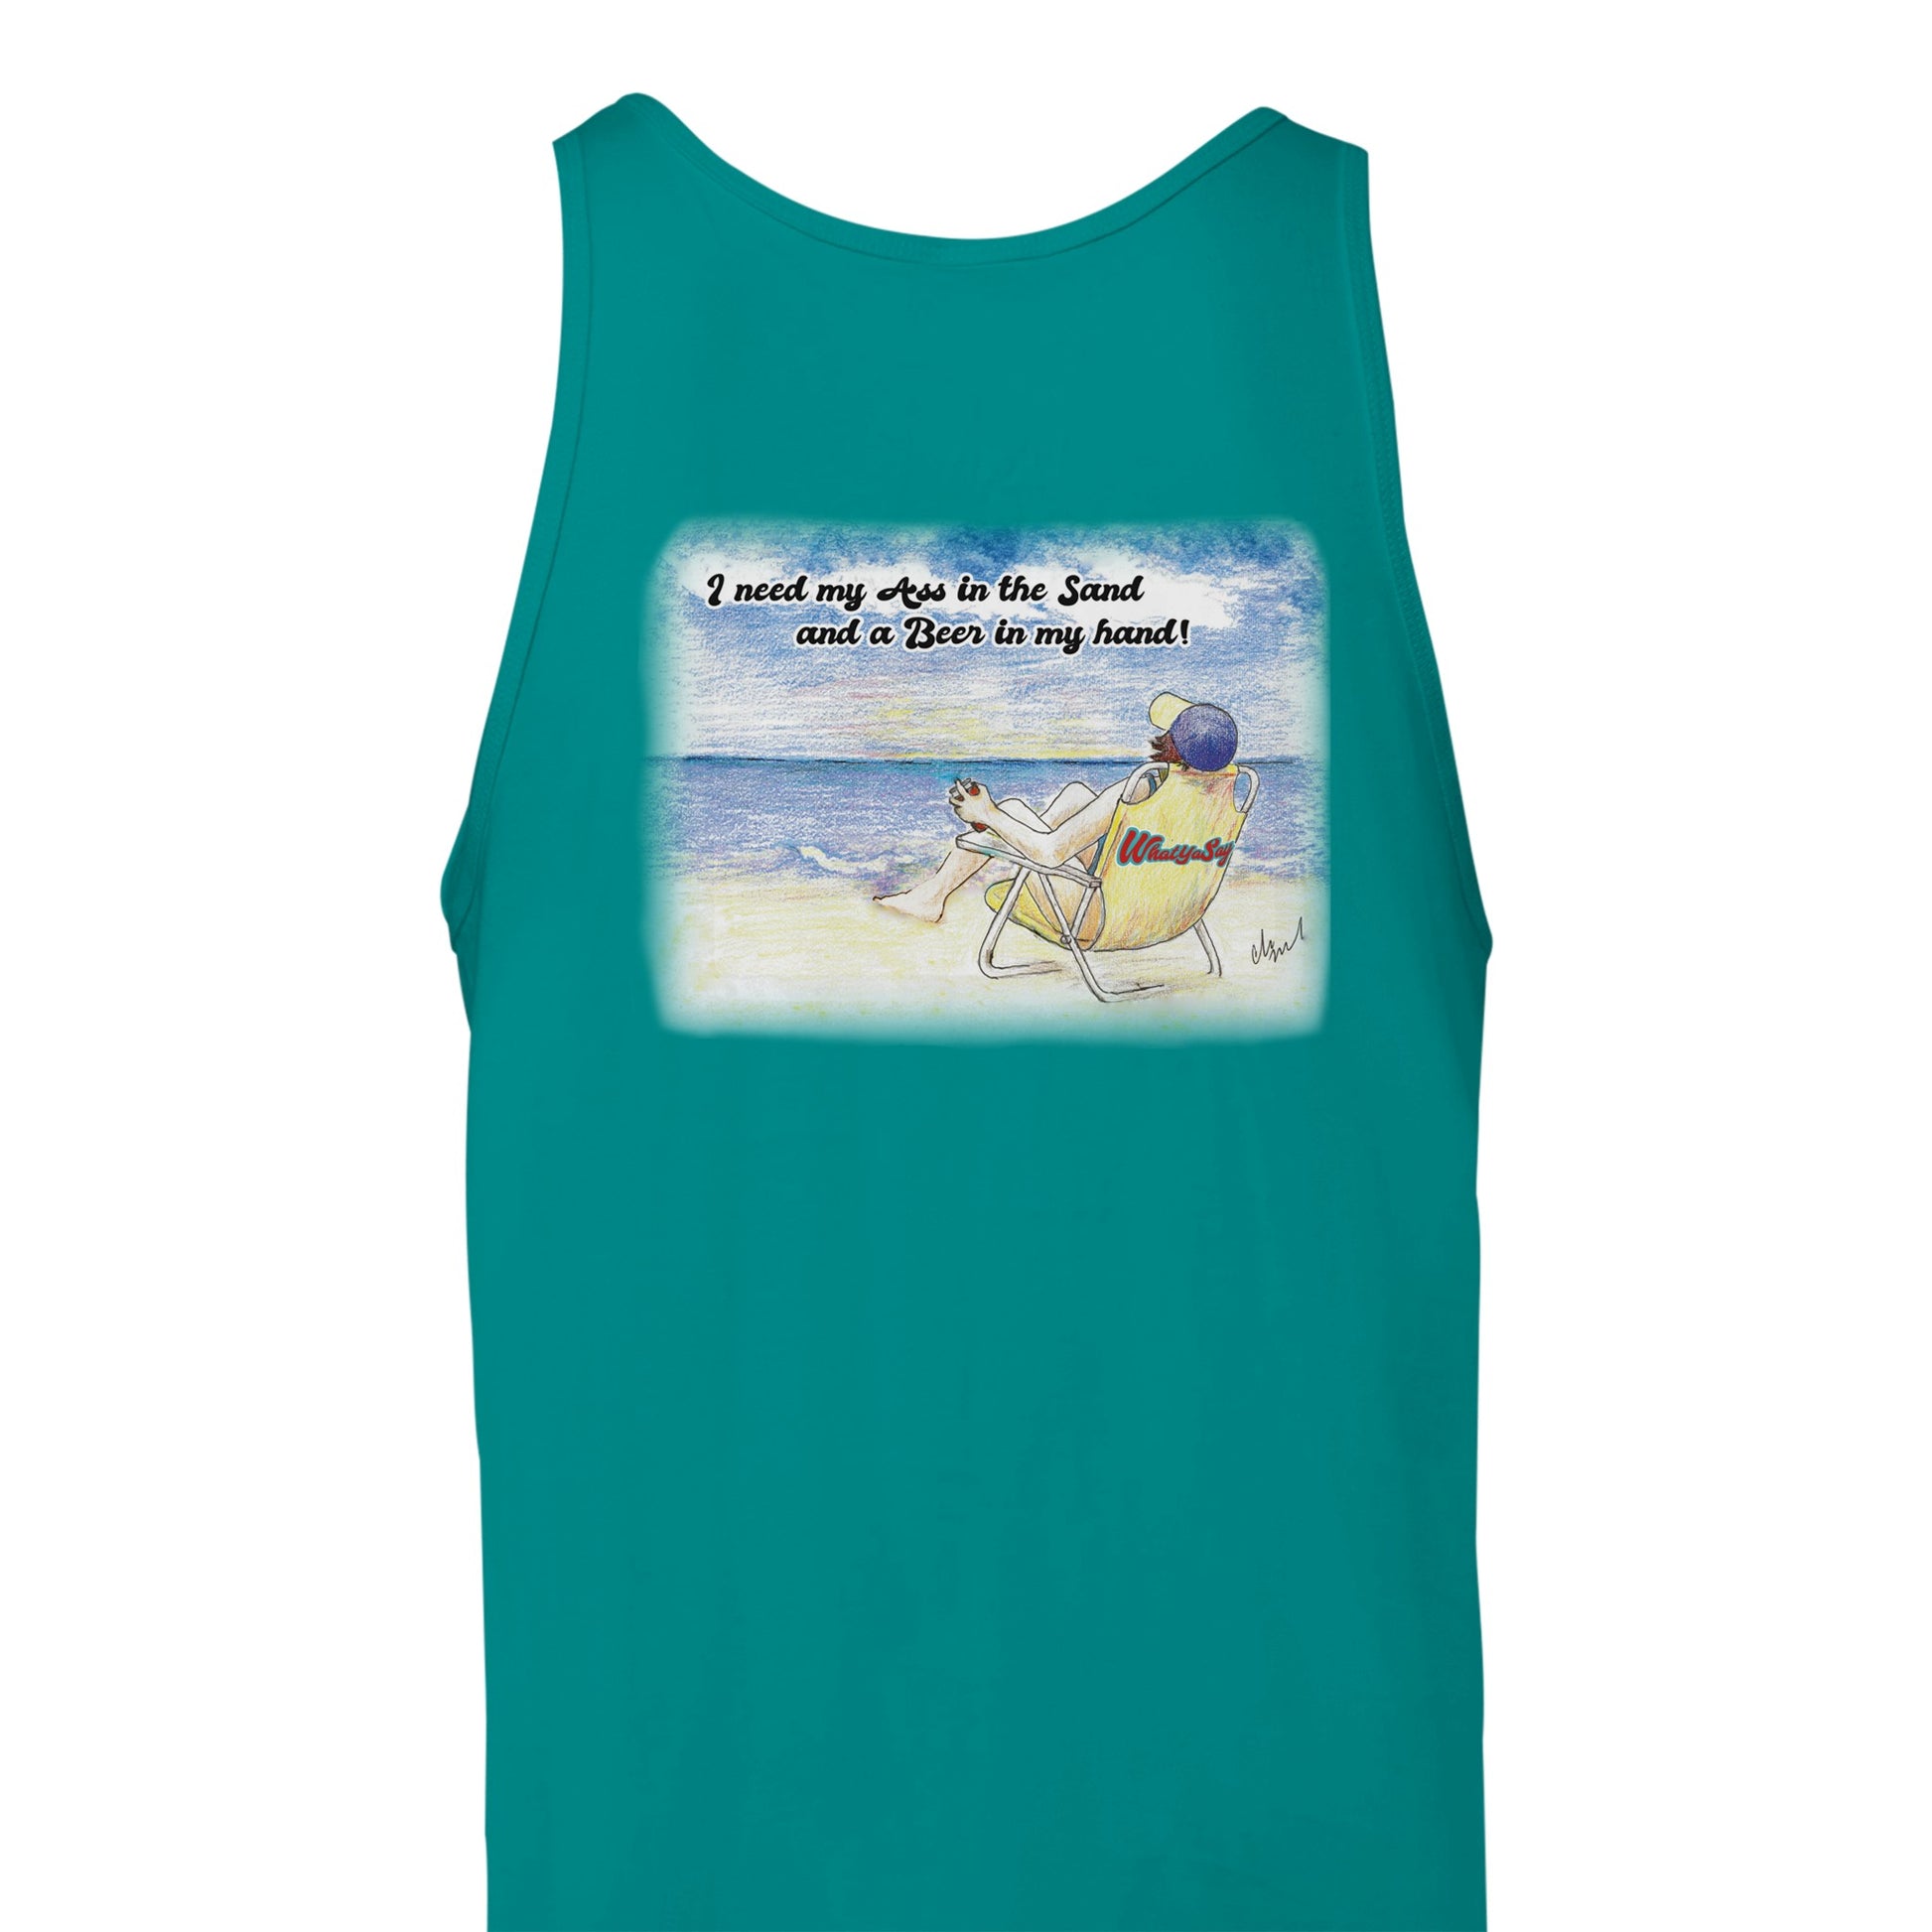 A teal Premium Unisex Tank Top with original artwork and motto I need my Ass in the Sand and a Beer in my hand on back and WhatYa Say logo on front from combed and ring-spun cotton back view from WhatYa Say Apparel.